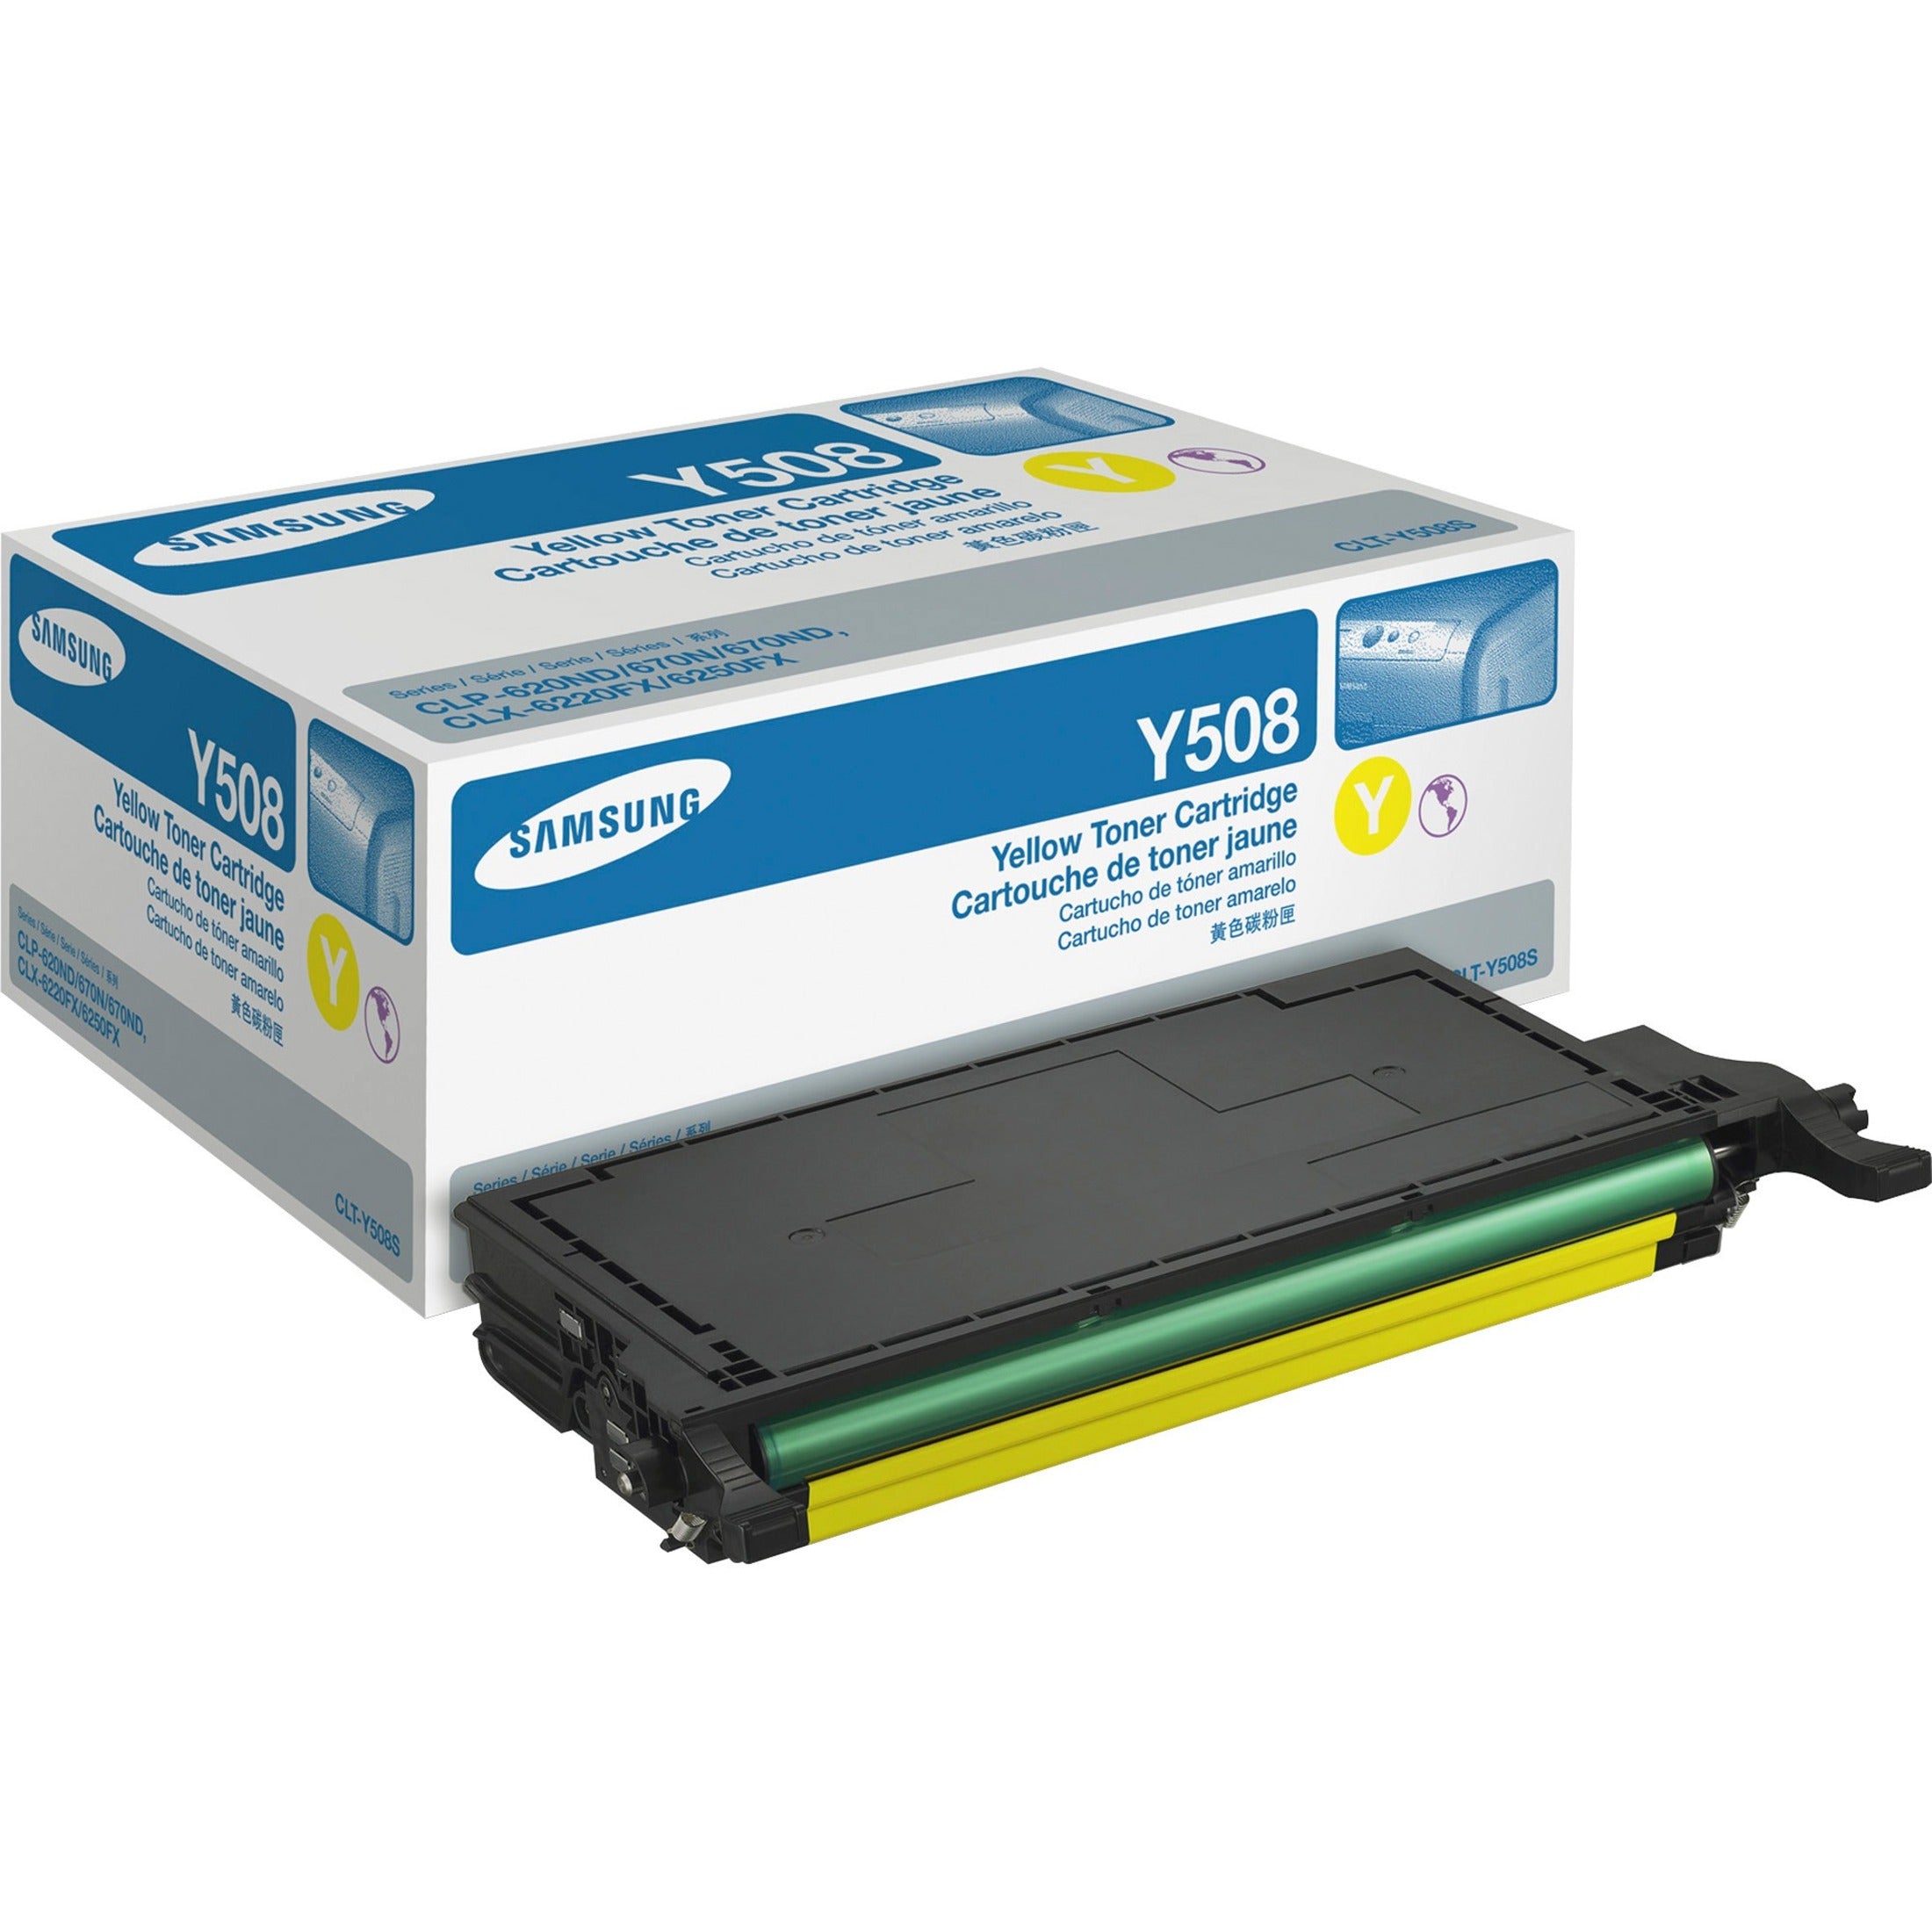 Samsung CLT-Y508S CLTC508S Toner Cartridge, Yellow, 2,000 Pages Yield